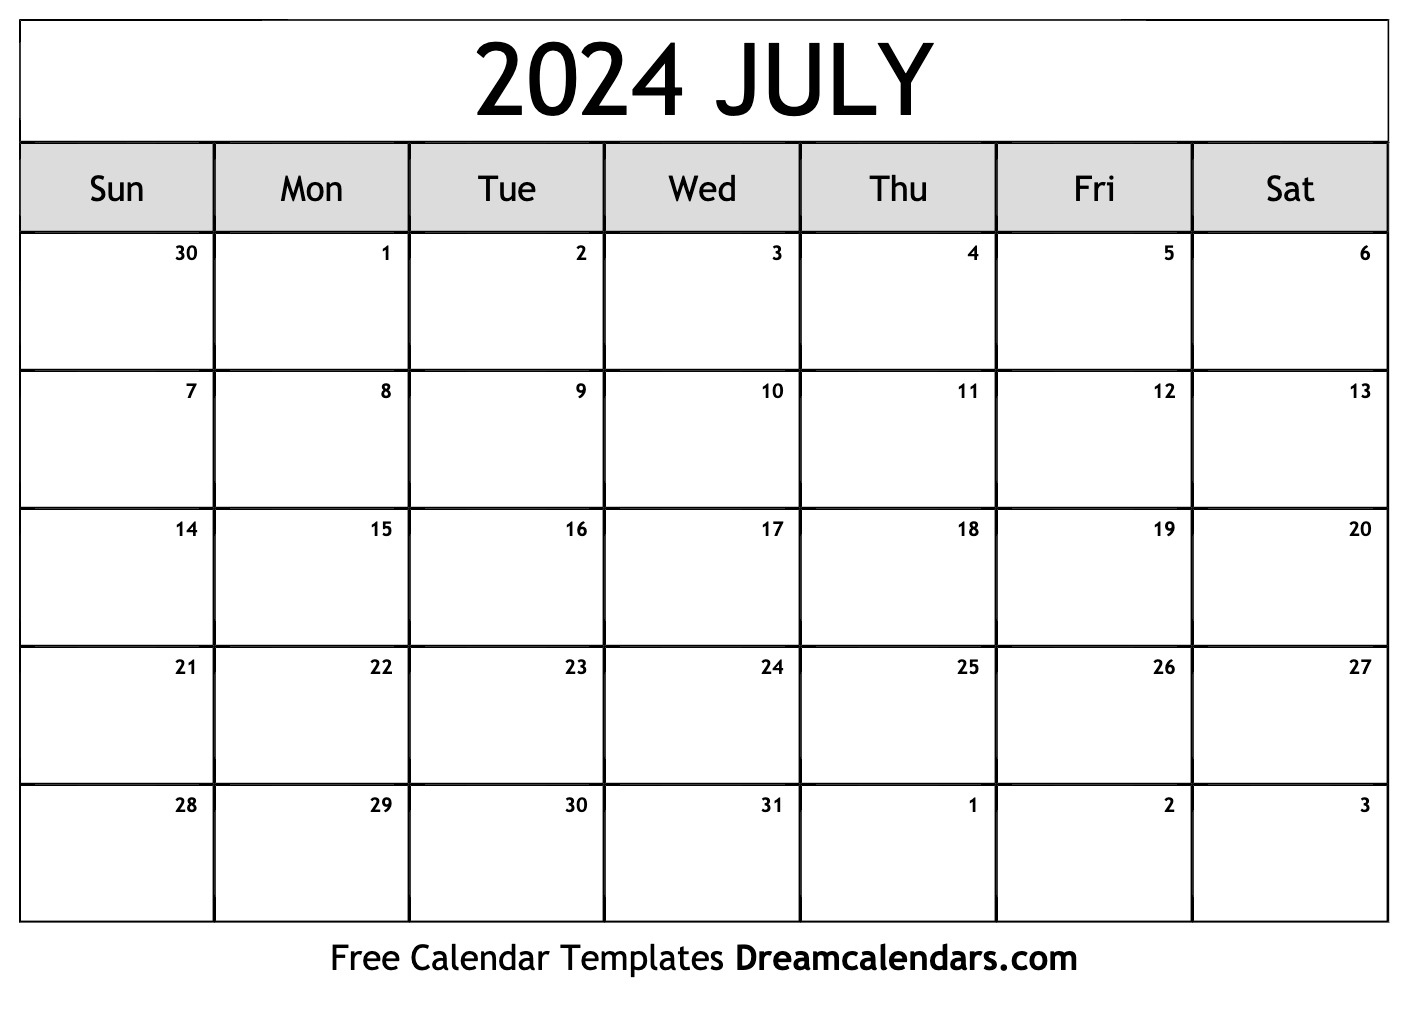 July 2024 Calendar | Free Blank Printable With Holidays throughout Free Printable Blank July 2024 Calendar